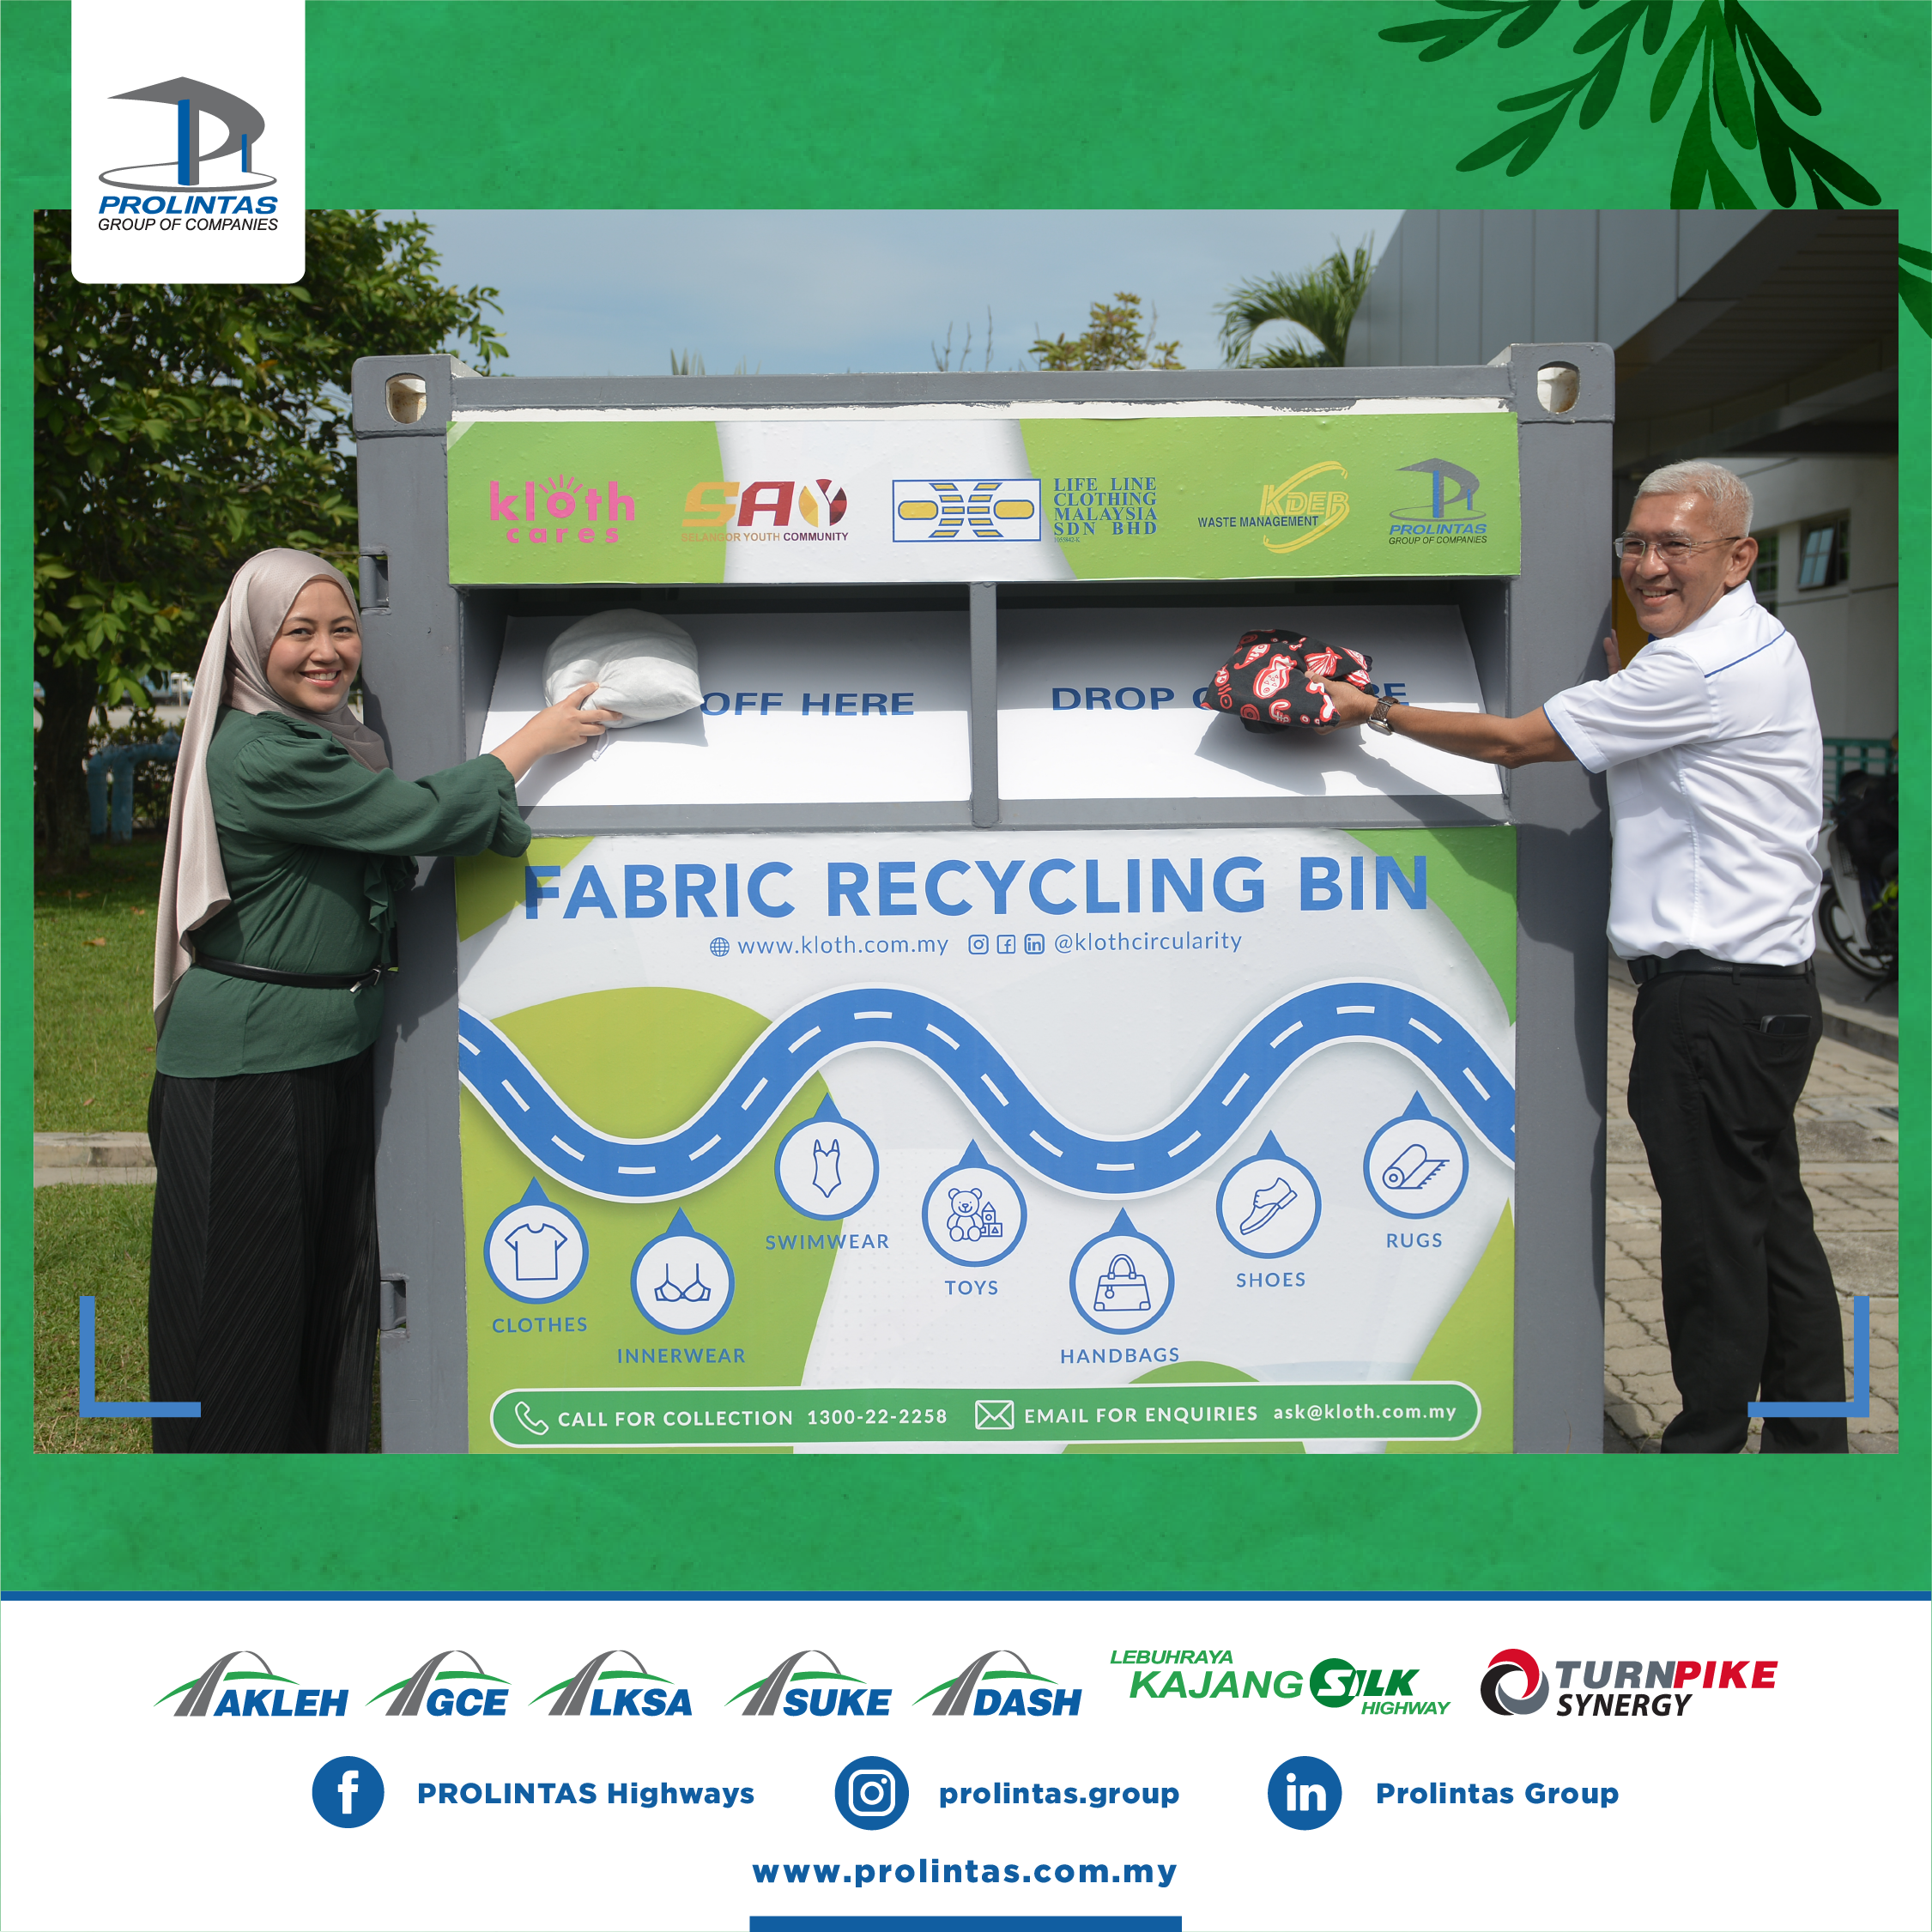 PROLINTAS Fabric Recycling Bin Campaign Officially Launched